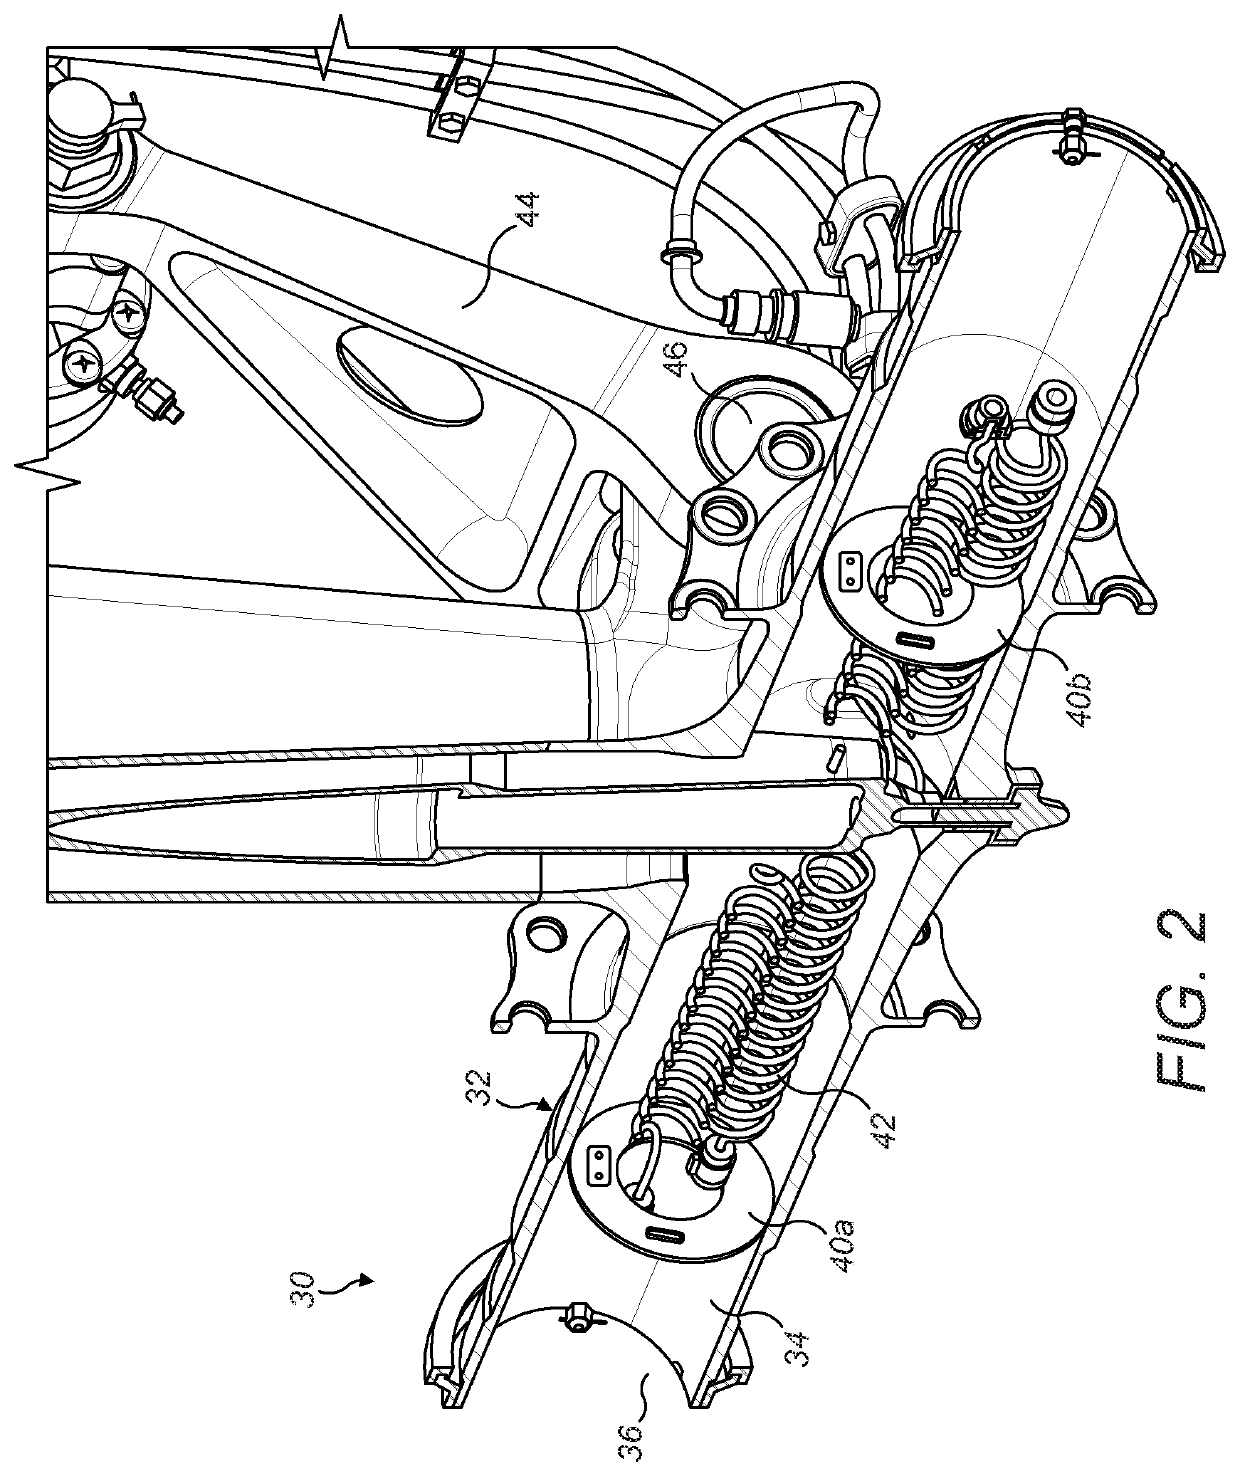 Aircraft landing gear assembly including a health and usage monitoring system (HUMS) and method